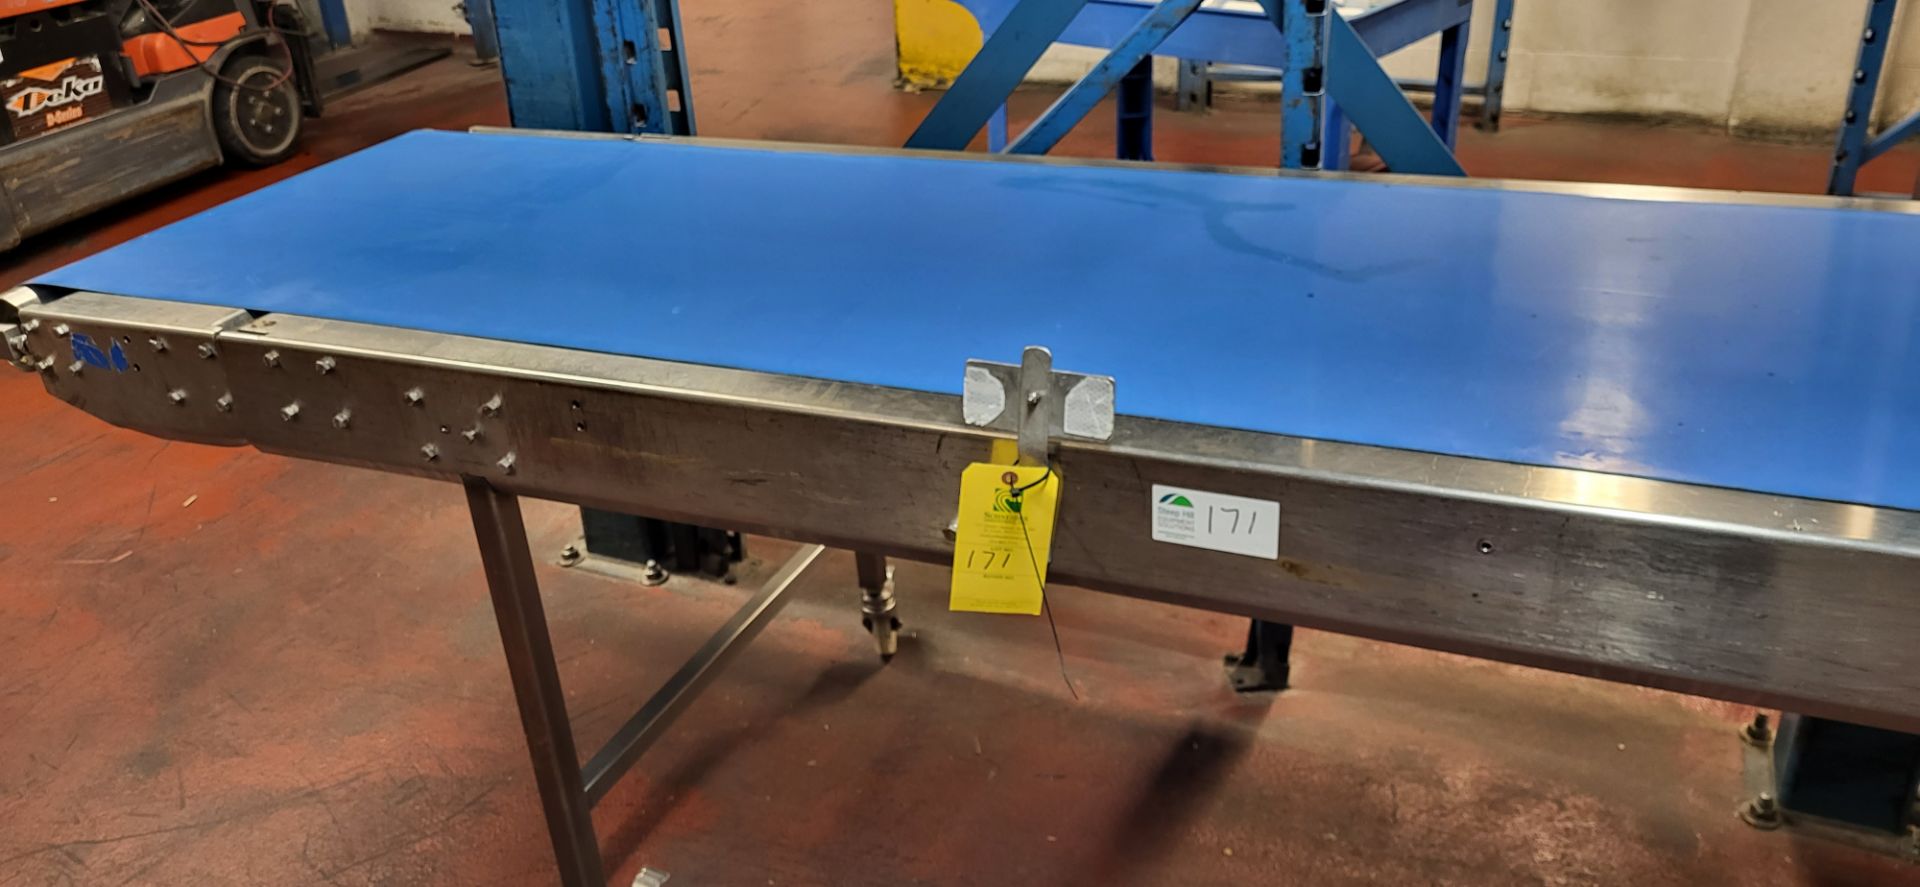 Blue Conveyor, Belt 187"L x 27" W, with VFD and 1/2HP motor - Image 3 of 6